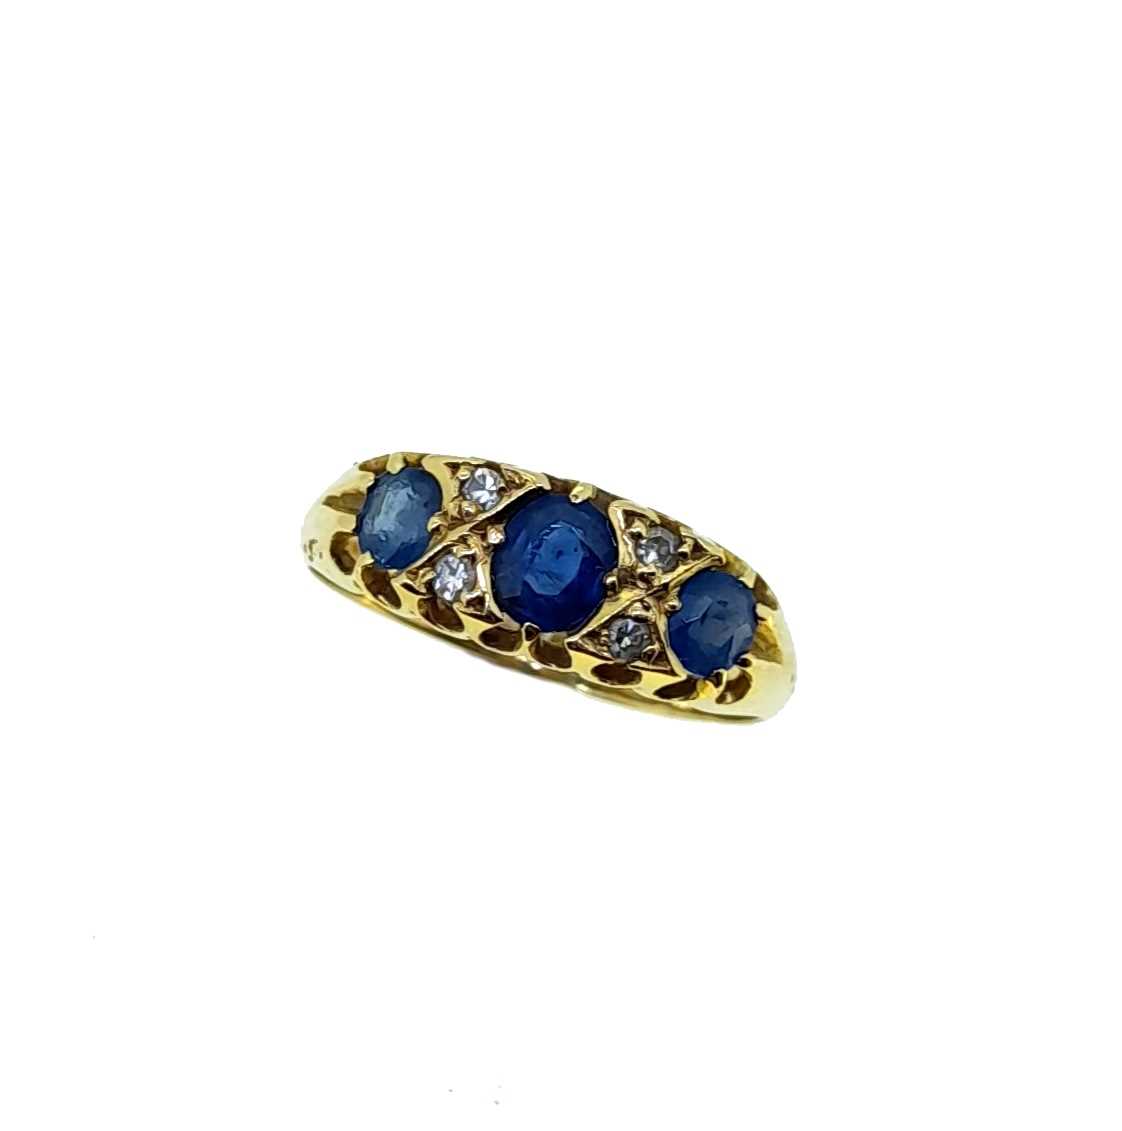 An early 20th century sapphire and diamond ring,